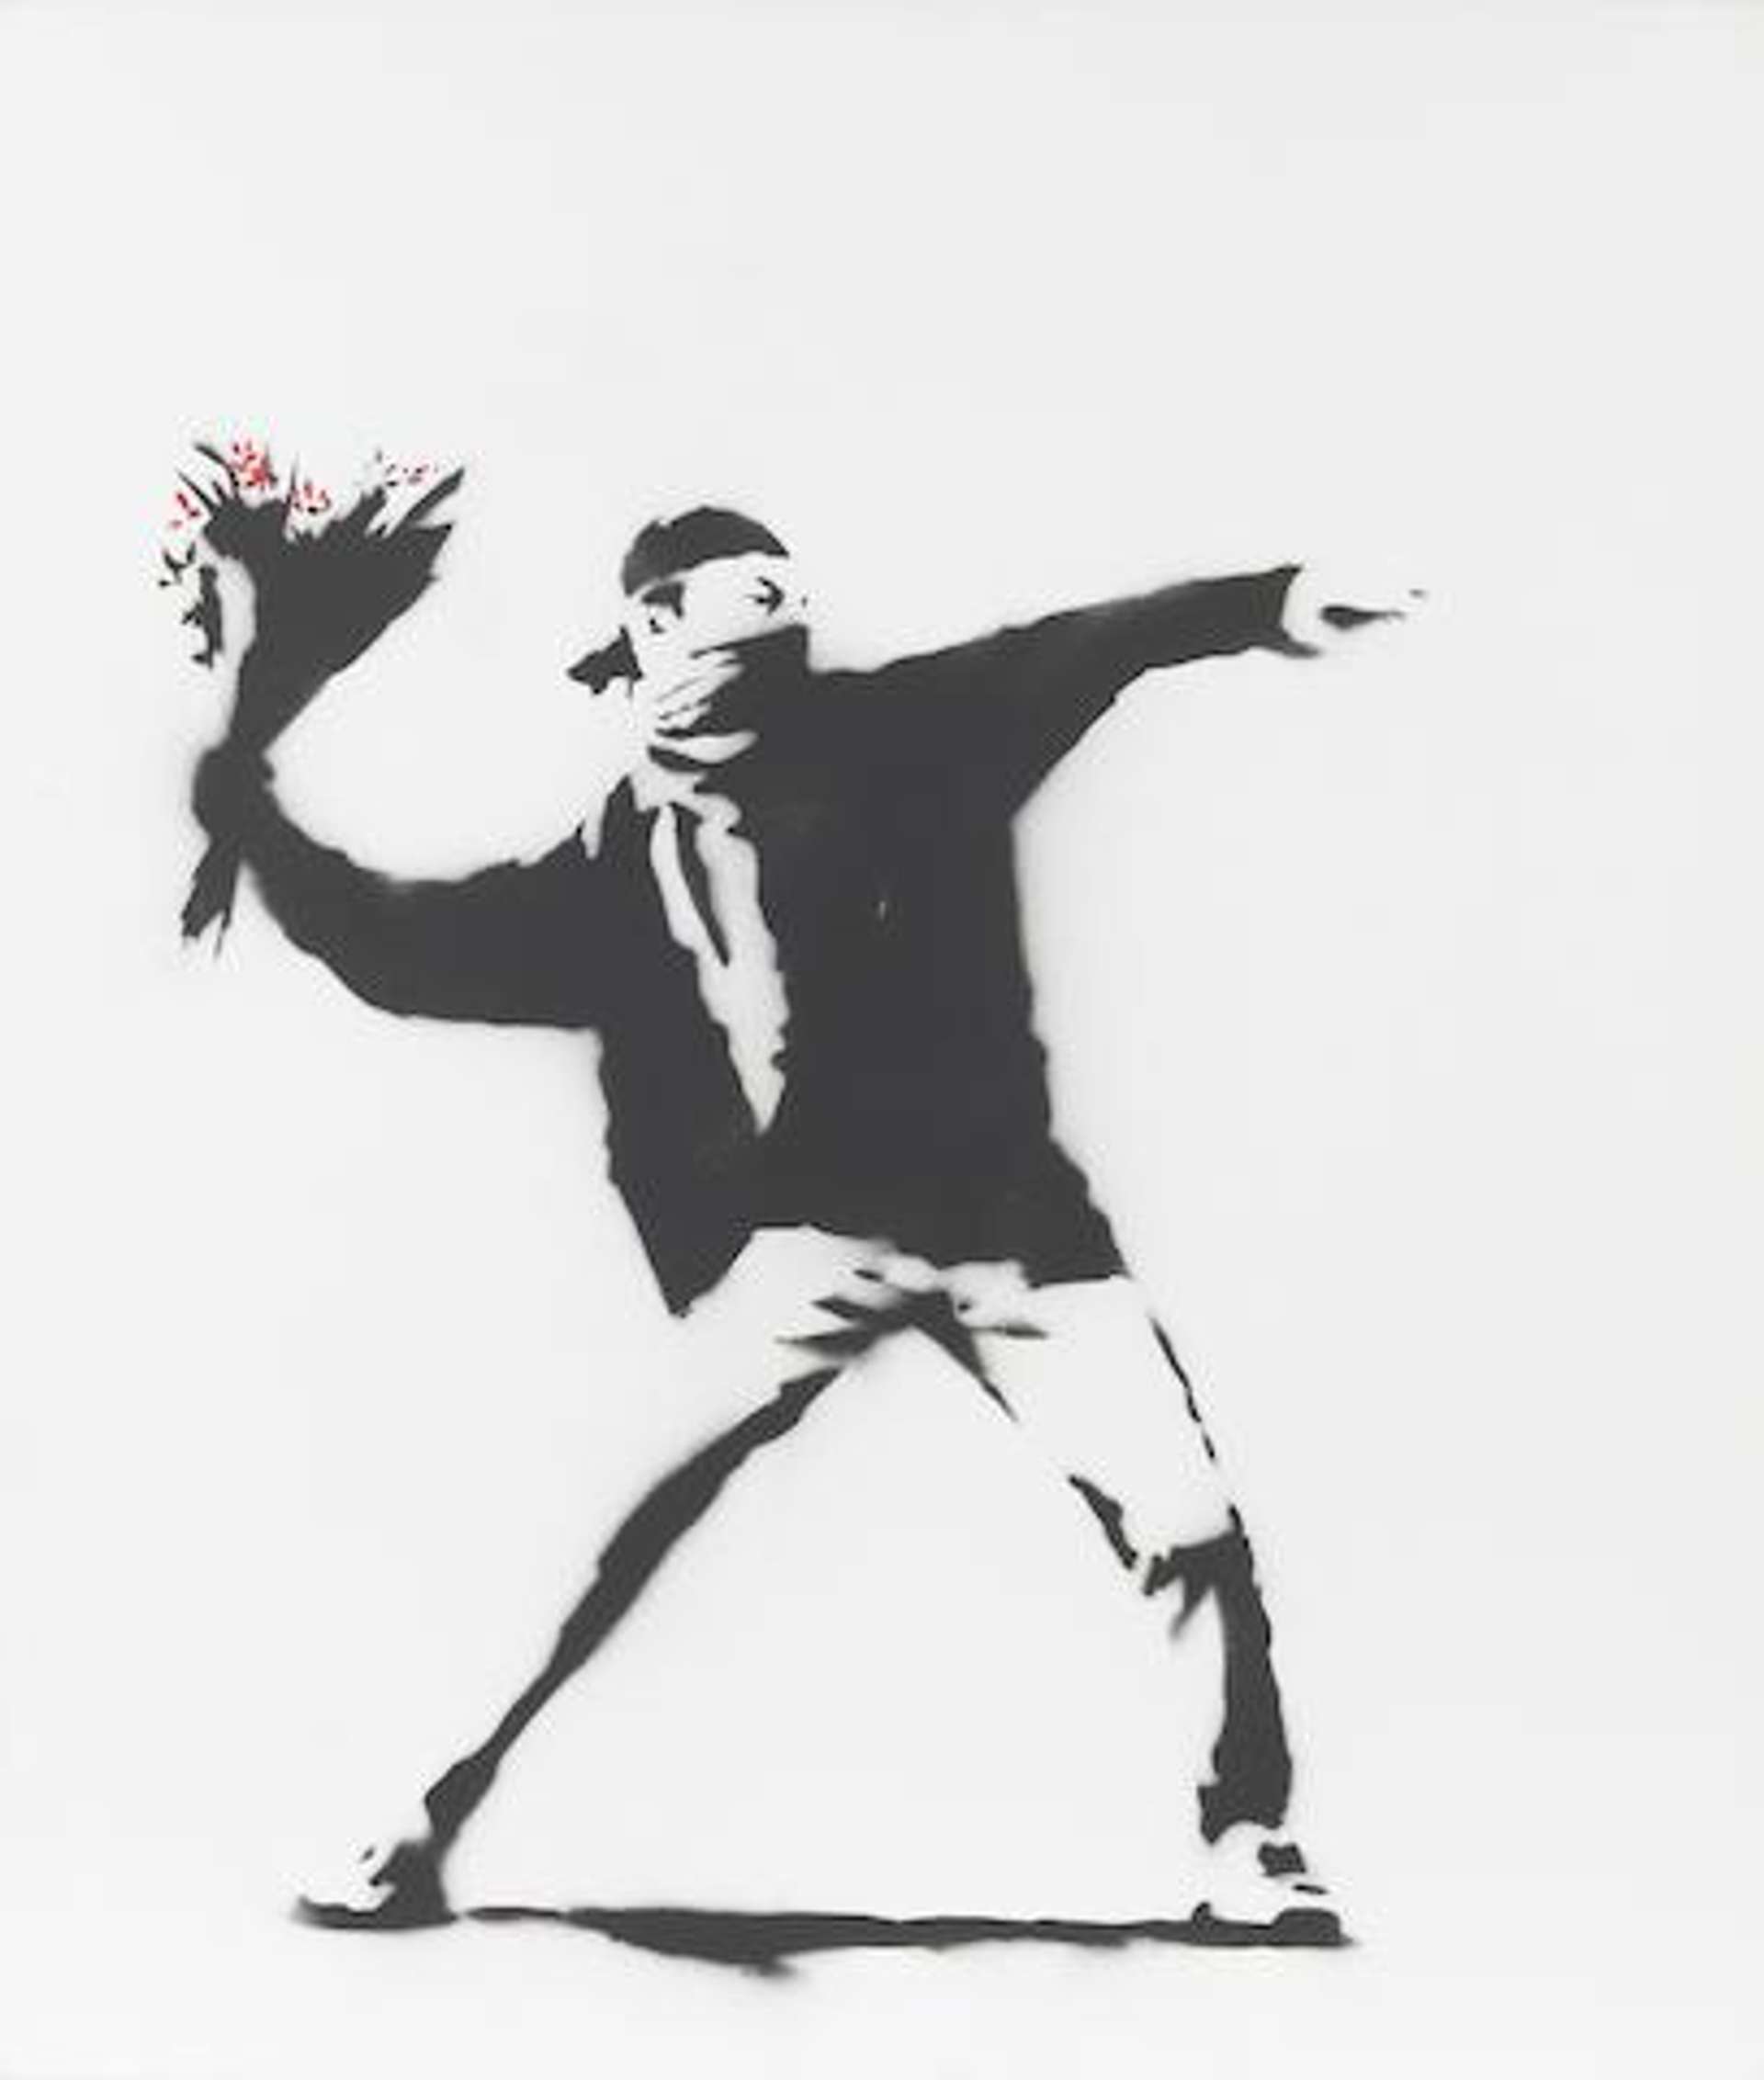 Stenciled image of a person wearing a backwards cap and a bandanna, throwing a bouquet of flowers into the air.